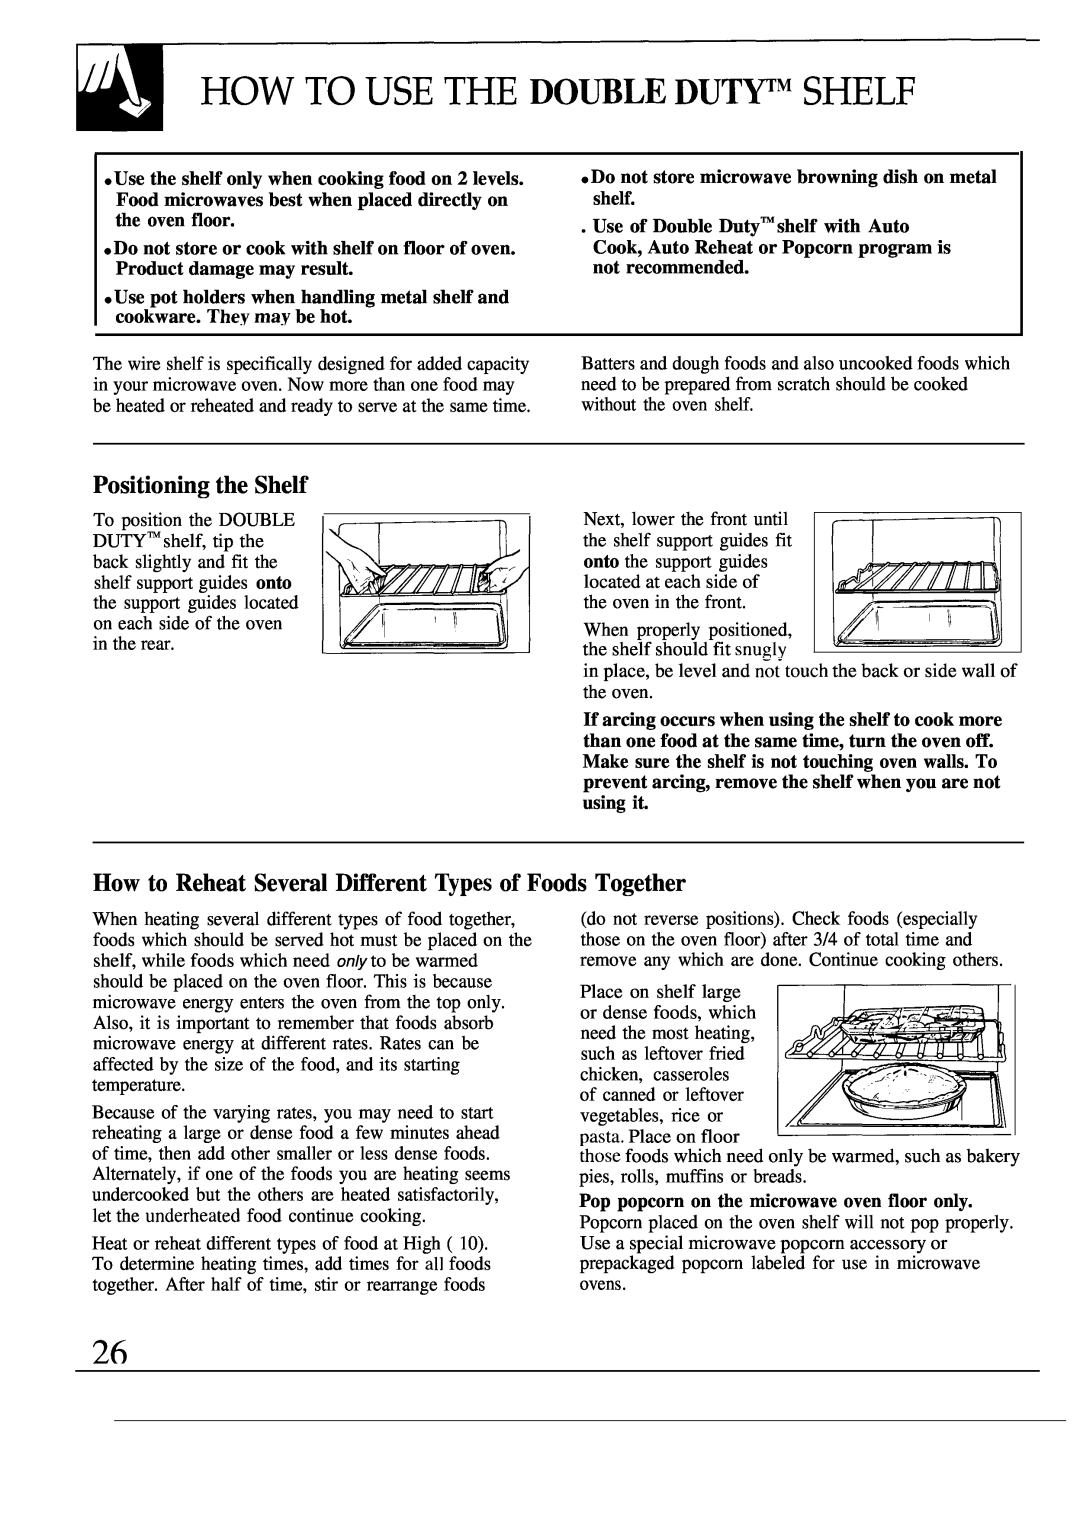 GE JEM31M How To Use The Do~Le Dutwm Shelf, Positioning the Shelf, How to Reheat Several Different ~pes of Foods Together 